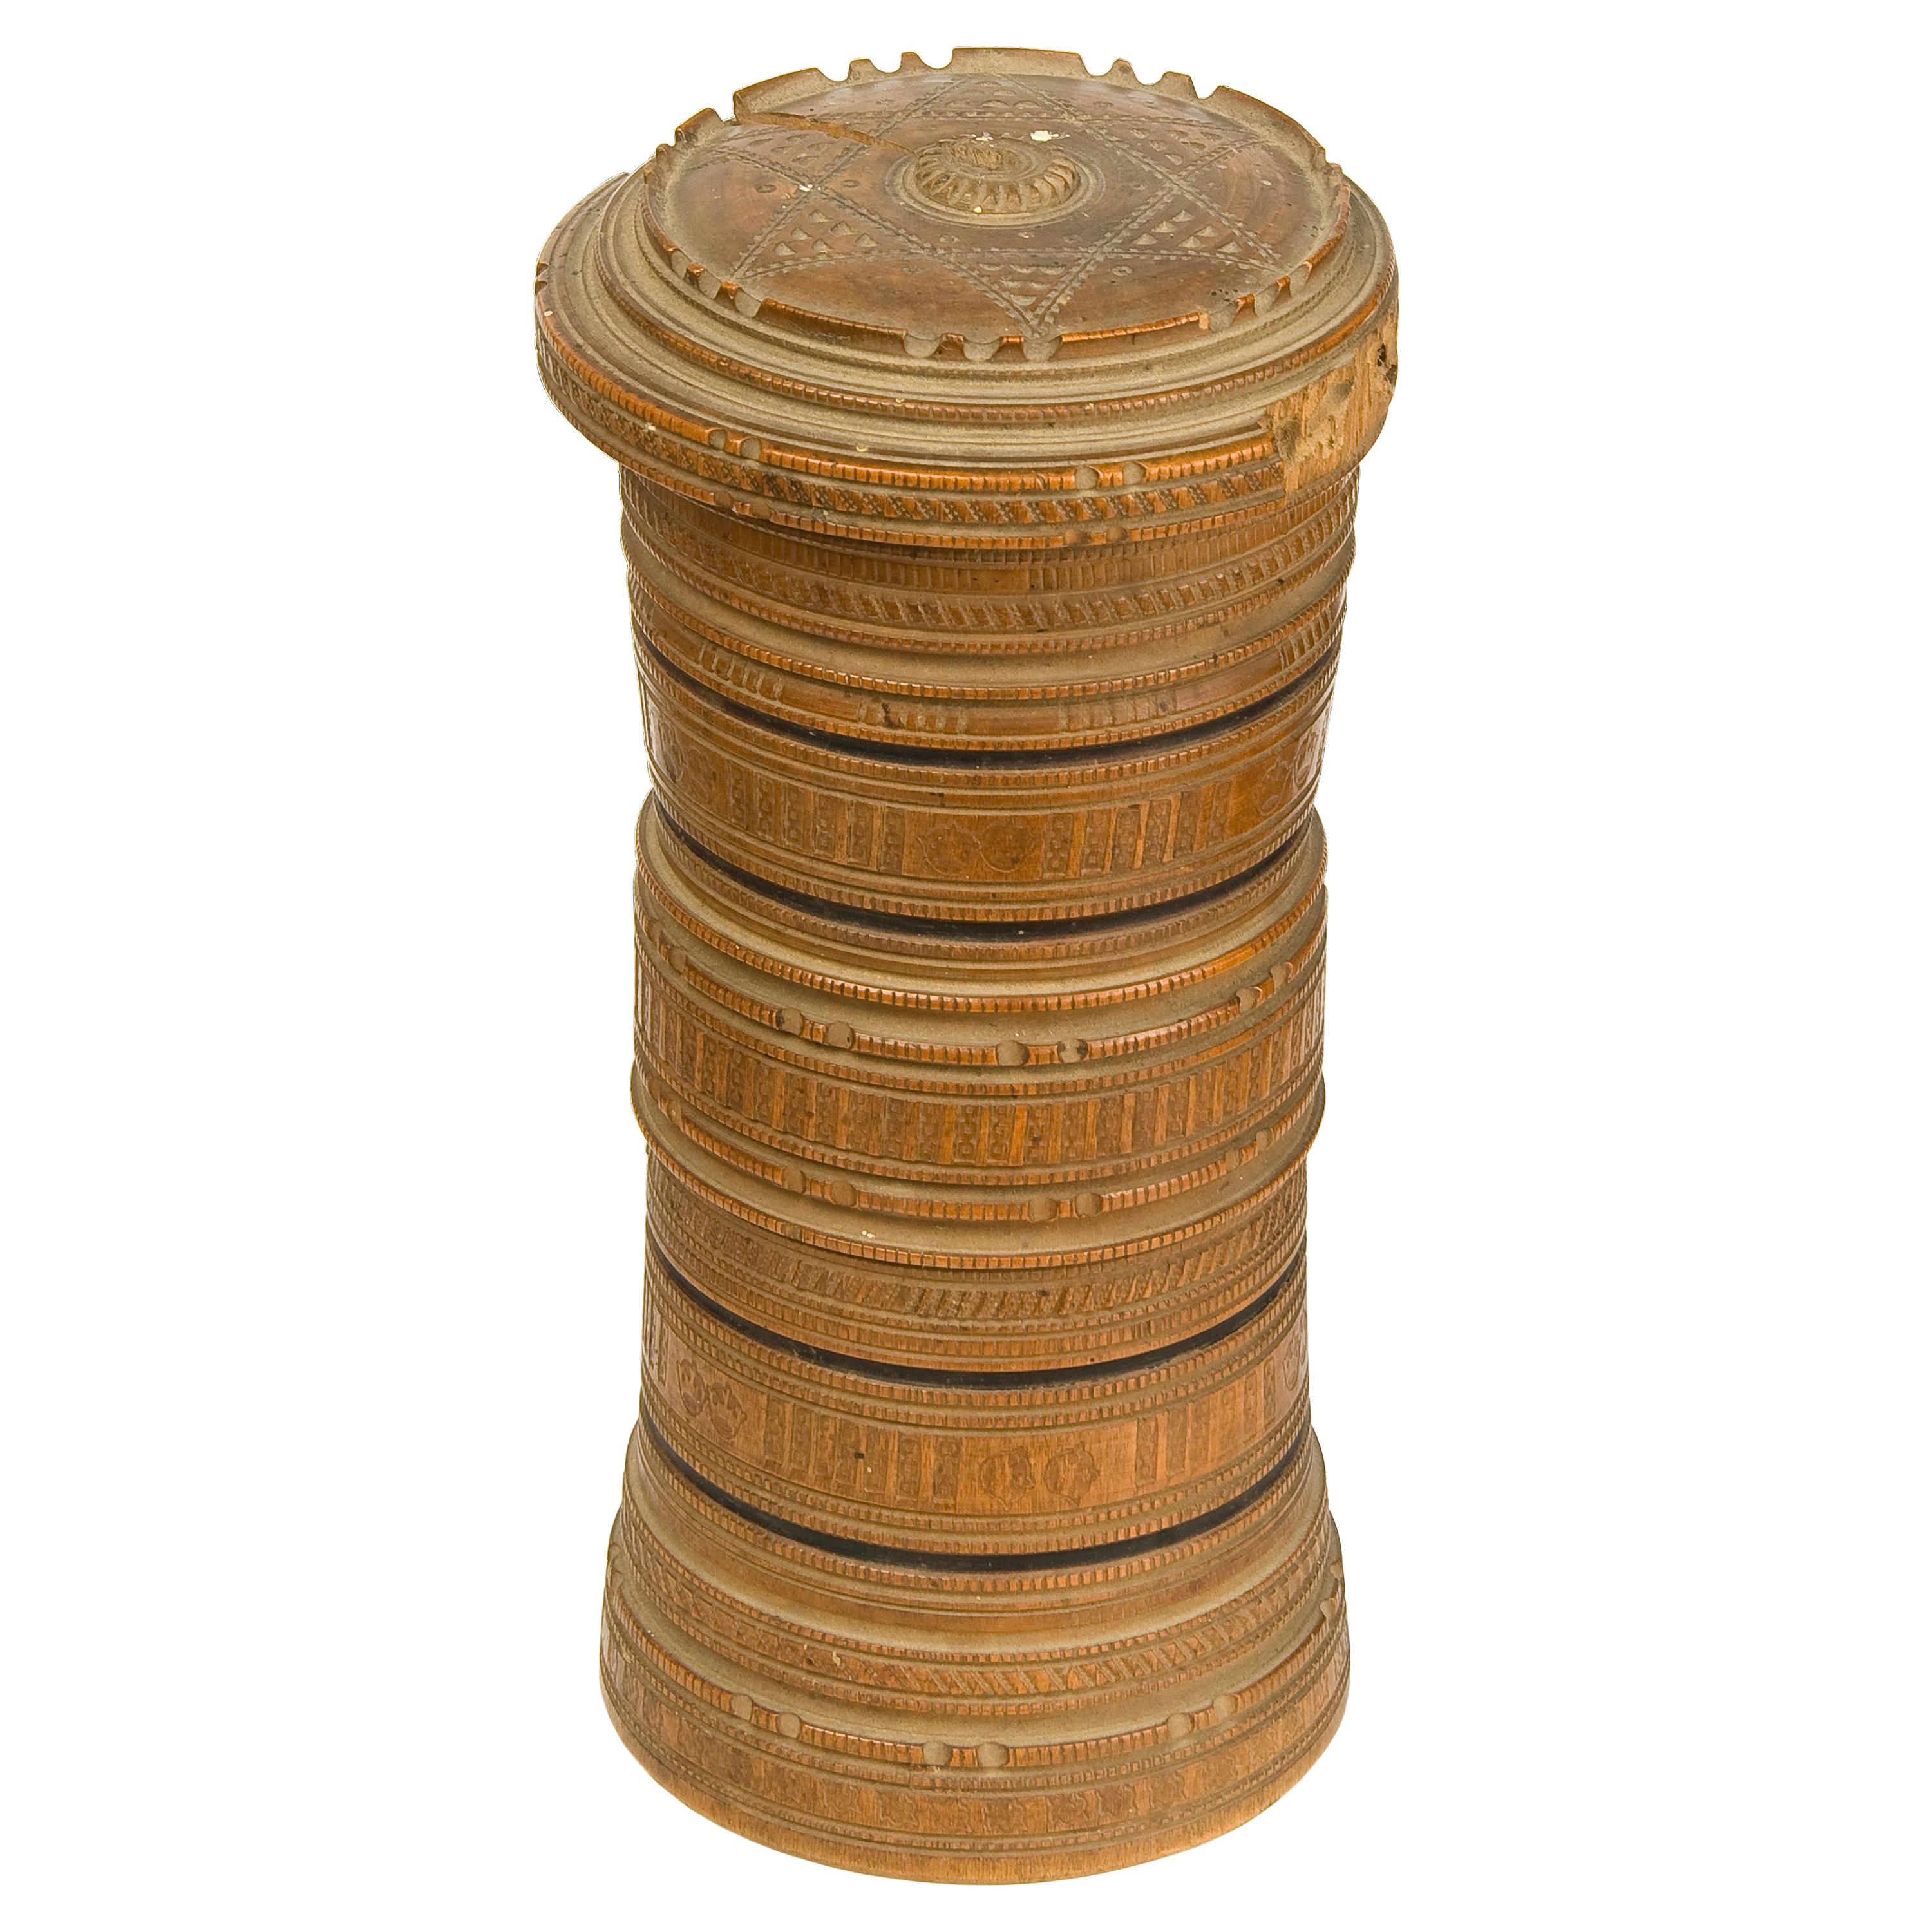 Wood Turner Test Cilindrical Box, 17th-18th Centuries For Sale at 1stDibs